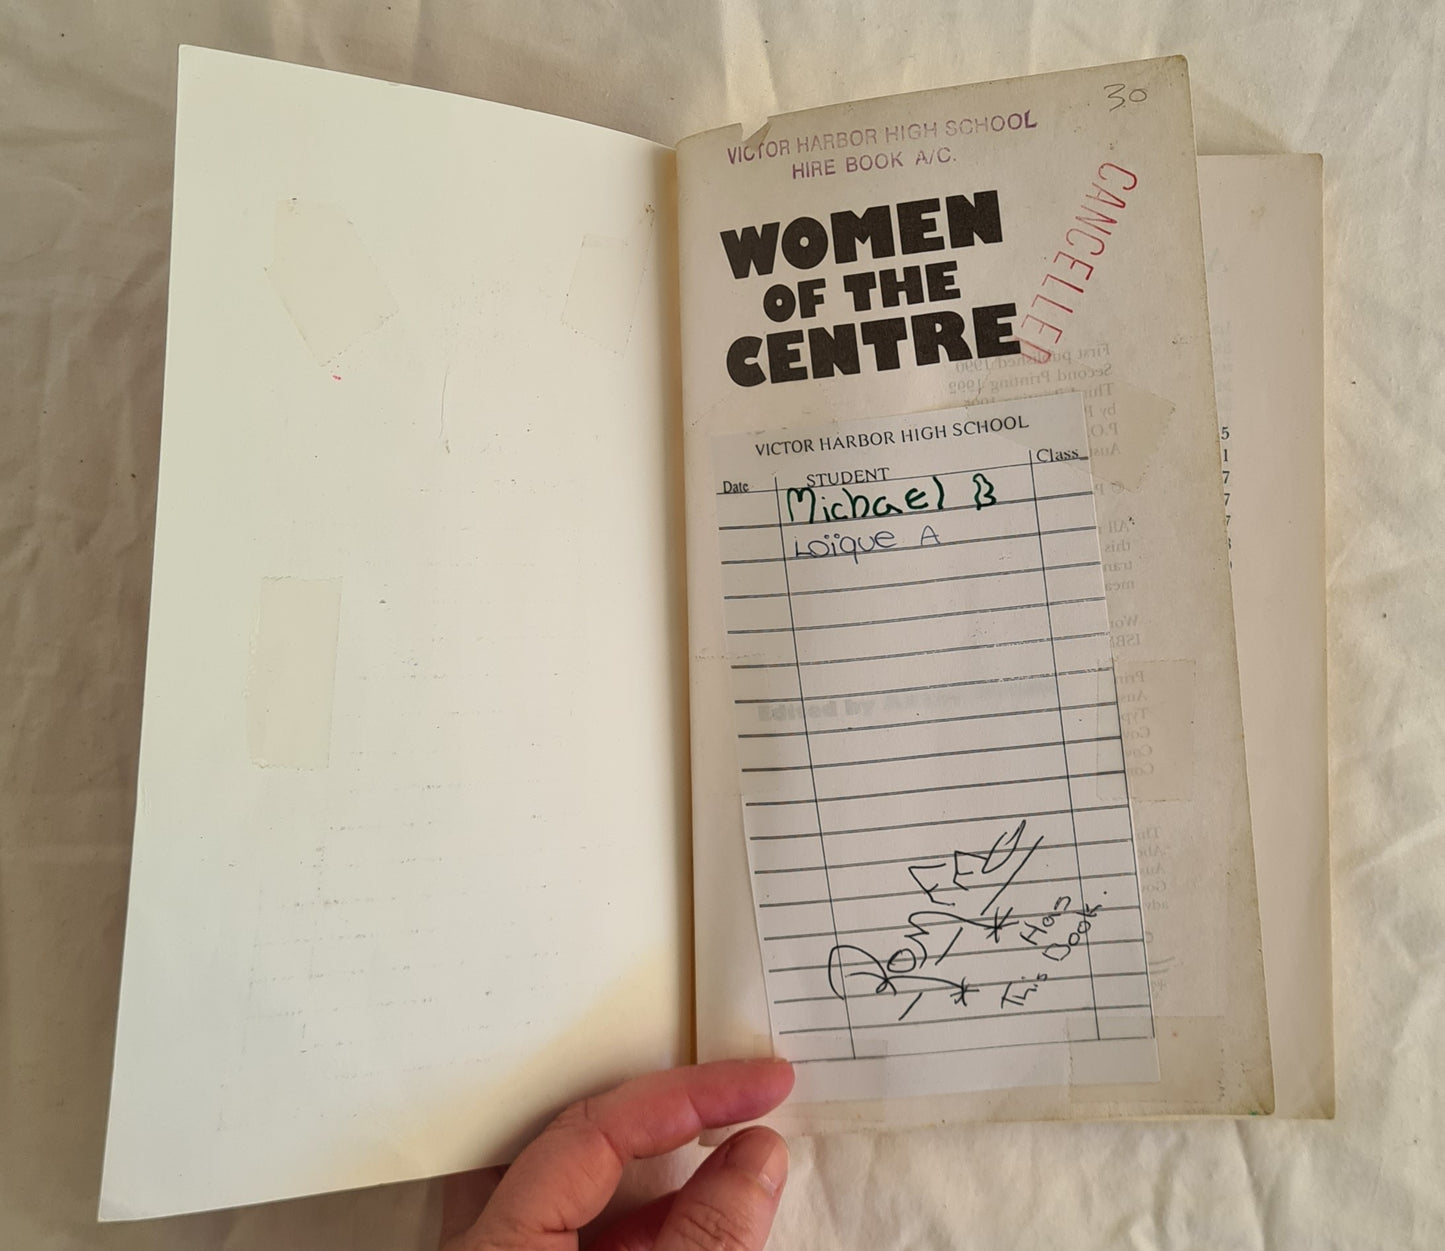 Women of the Centre by Adele Pring